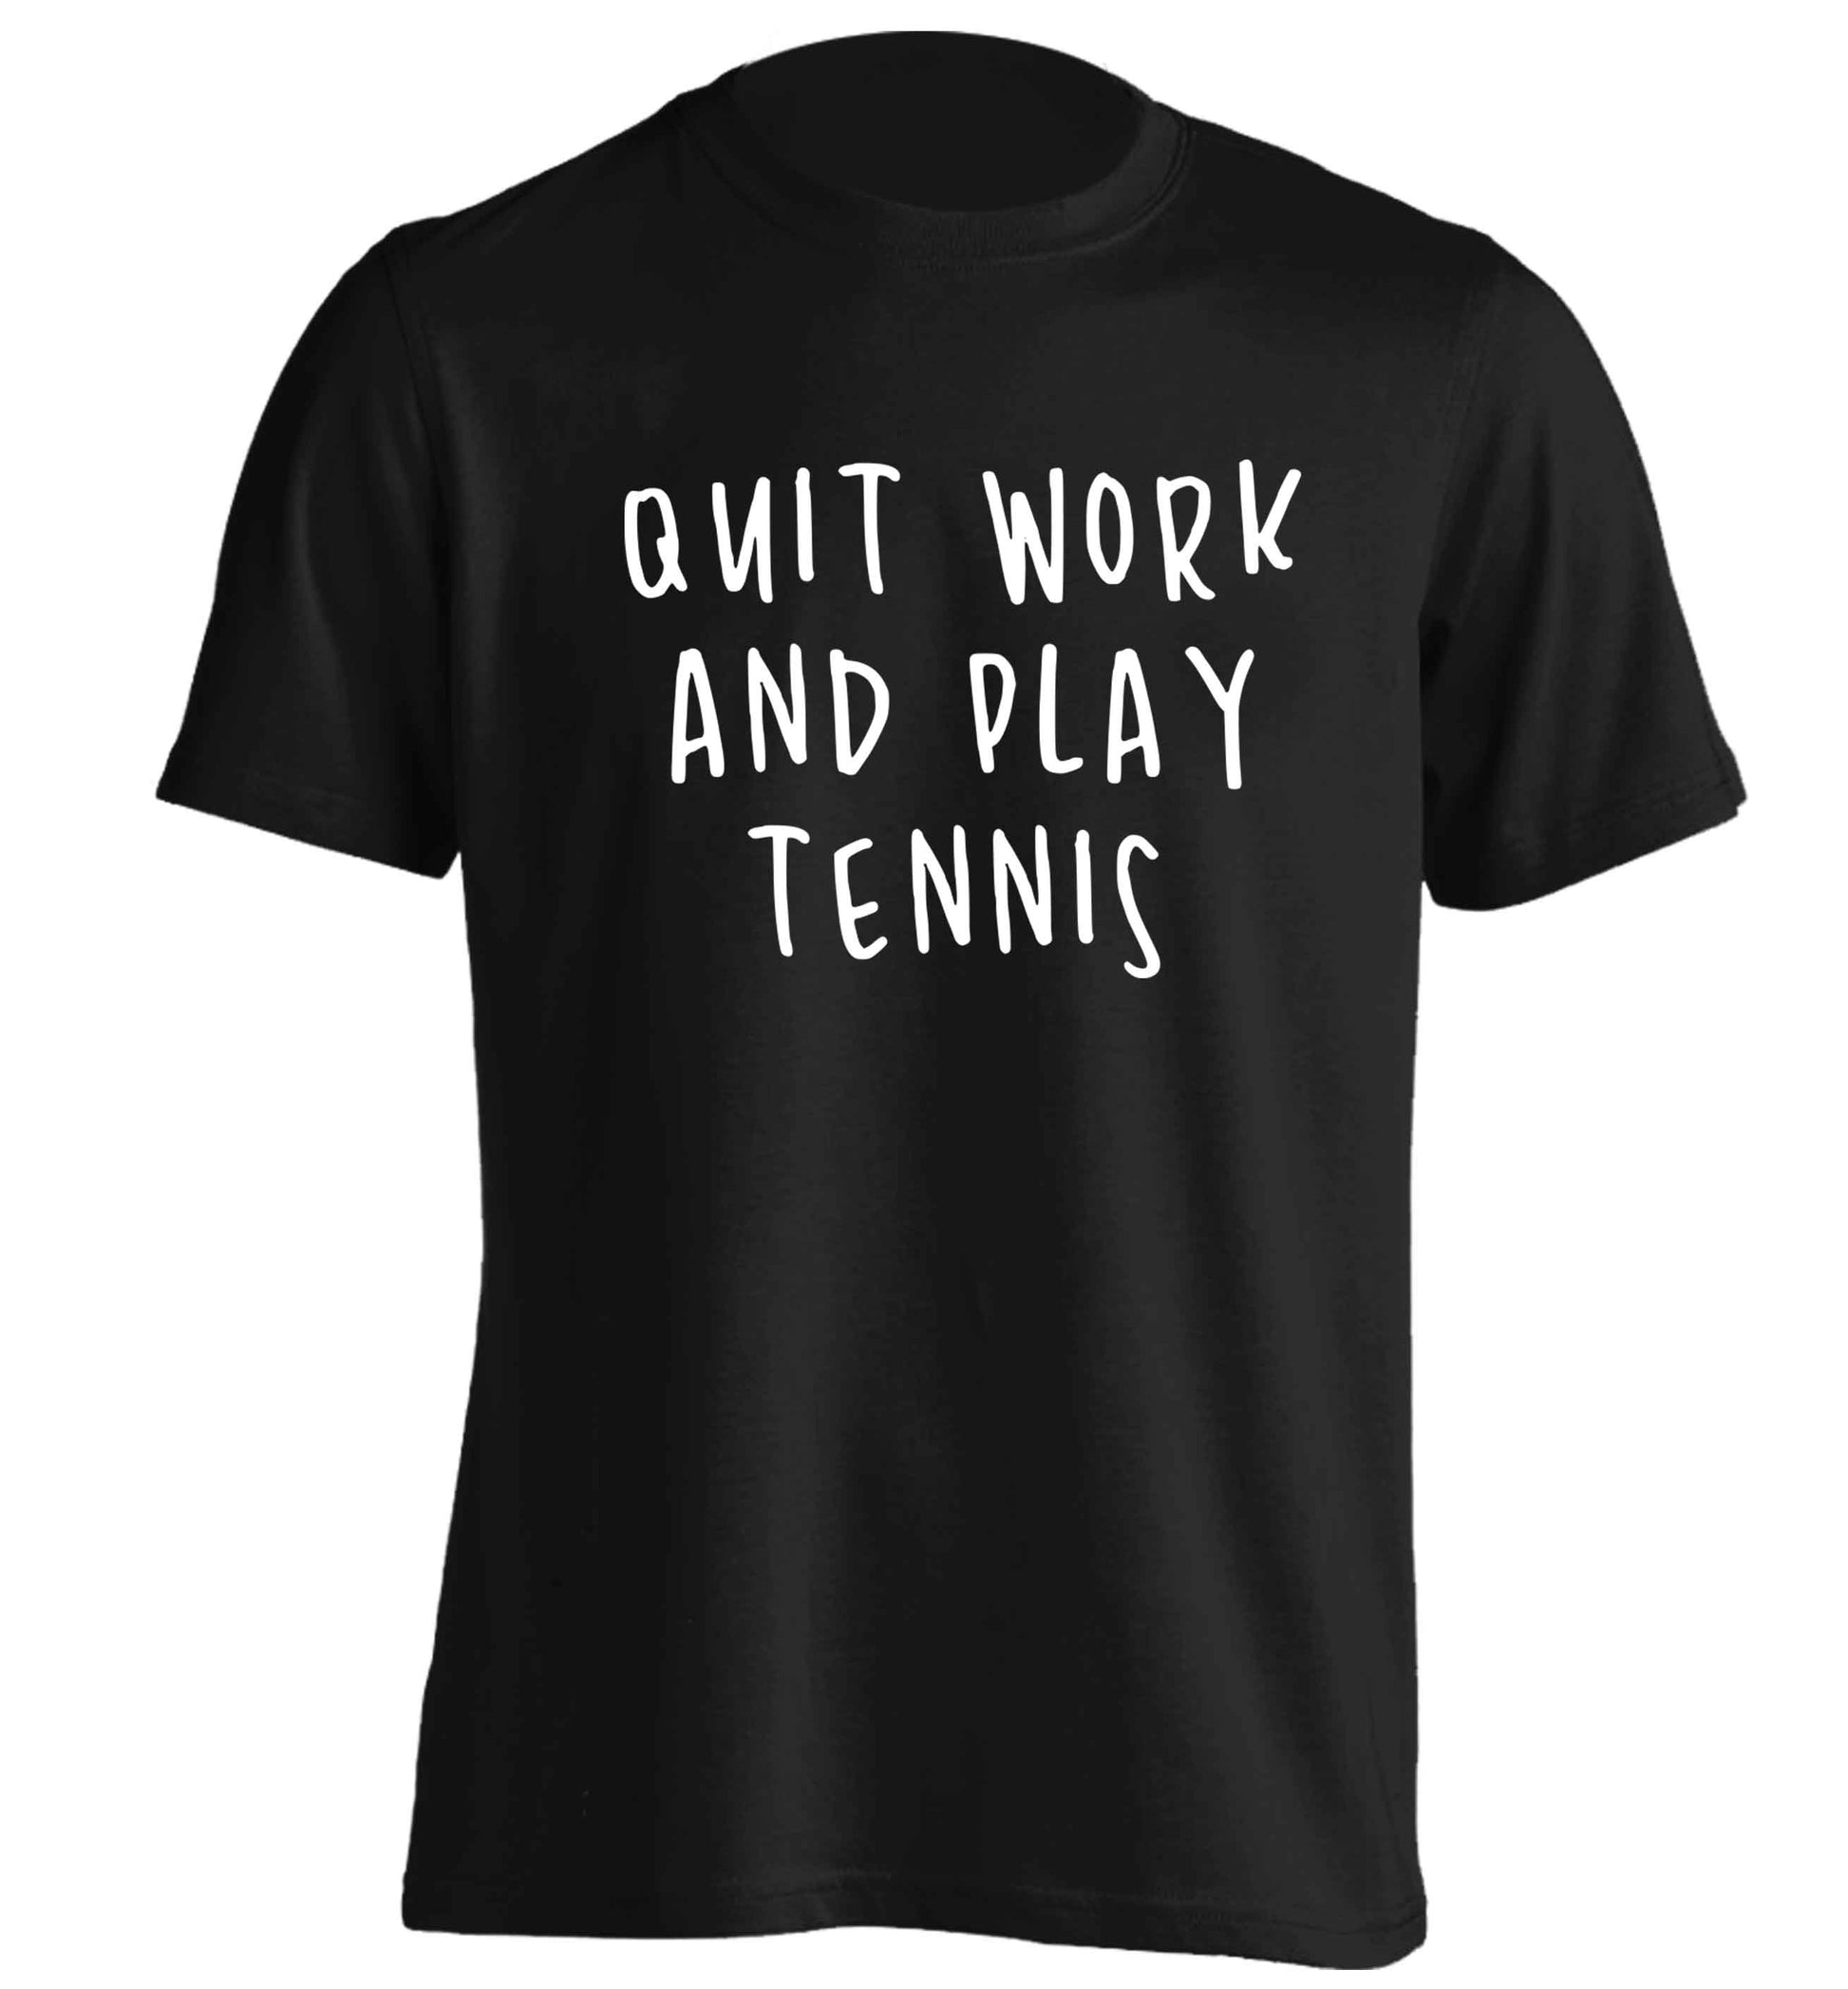 Quit work and play tennis adults unisex black Tshirt 2XL